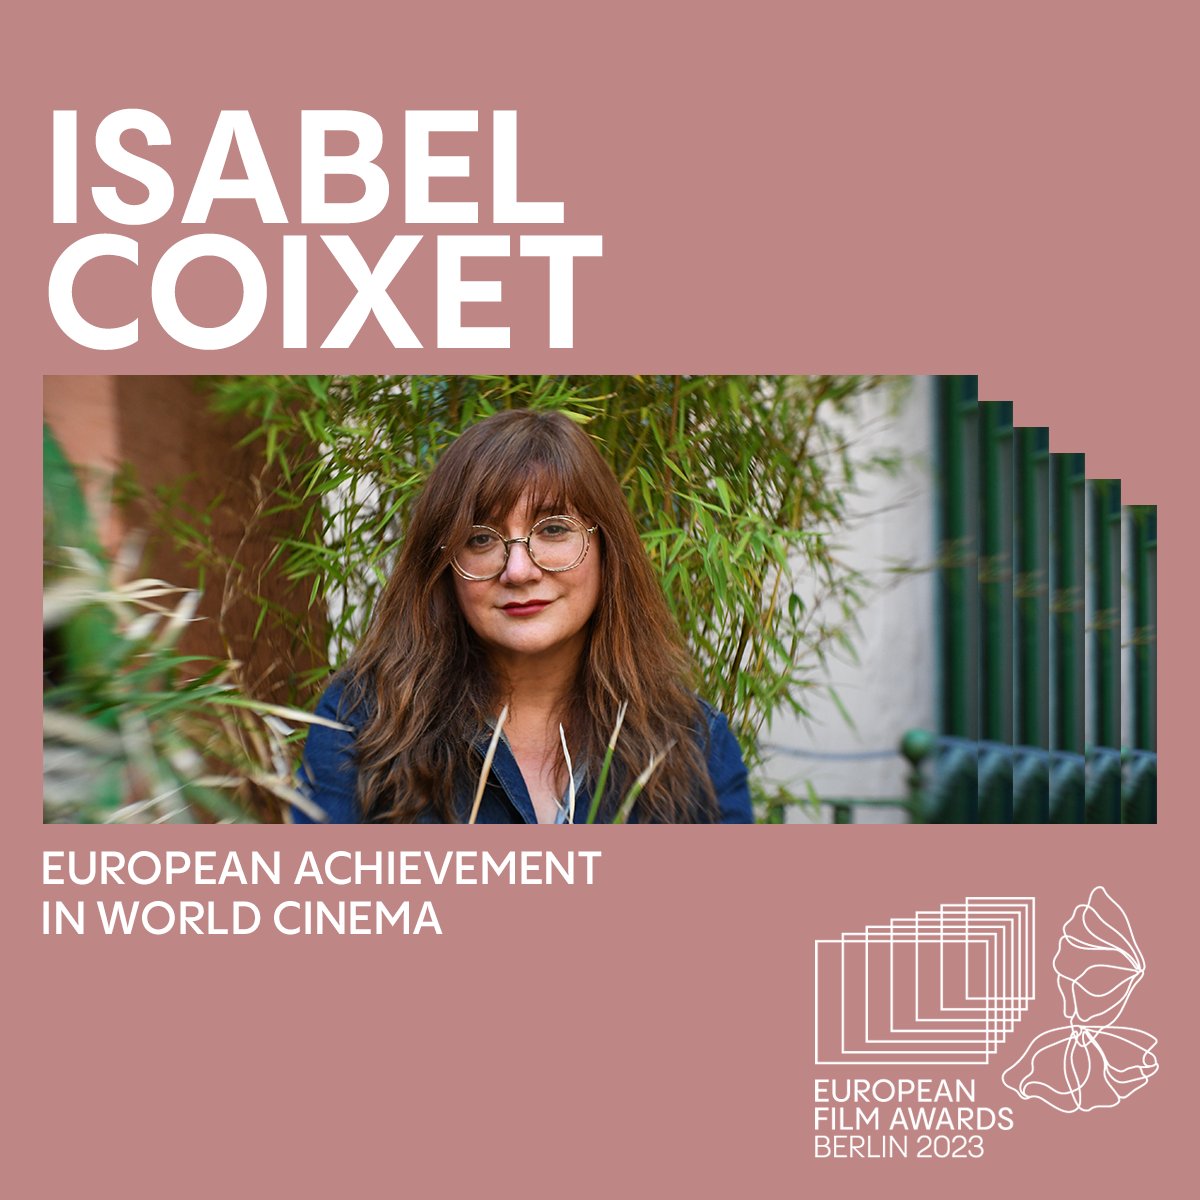 It is a great pleasure for the European Film Academy to present the European Achievement in World Cinema Award to Spanish director Isabel Coixet for her impressive contribution to the world of cinema! 🙌 Photo: Zoe Sala 👉 Read more here: bit.ly/3QZCR1l